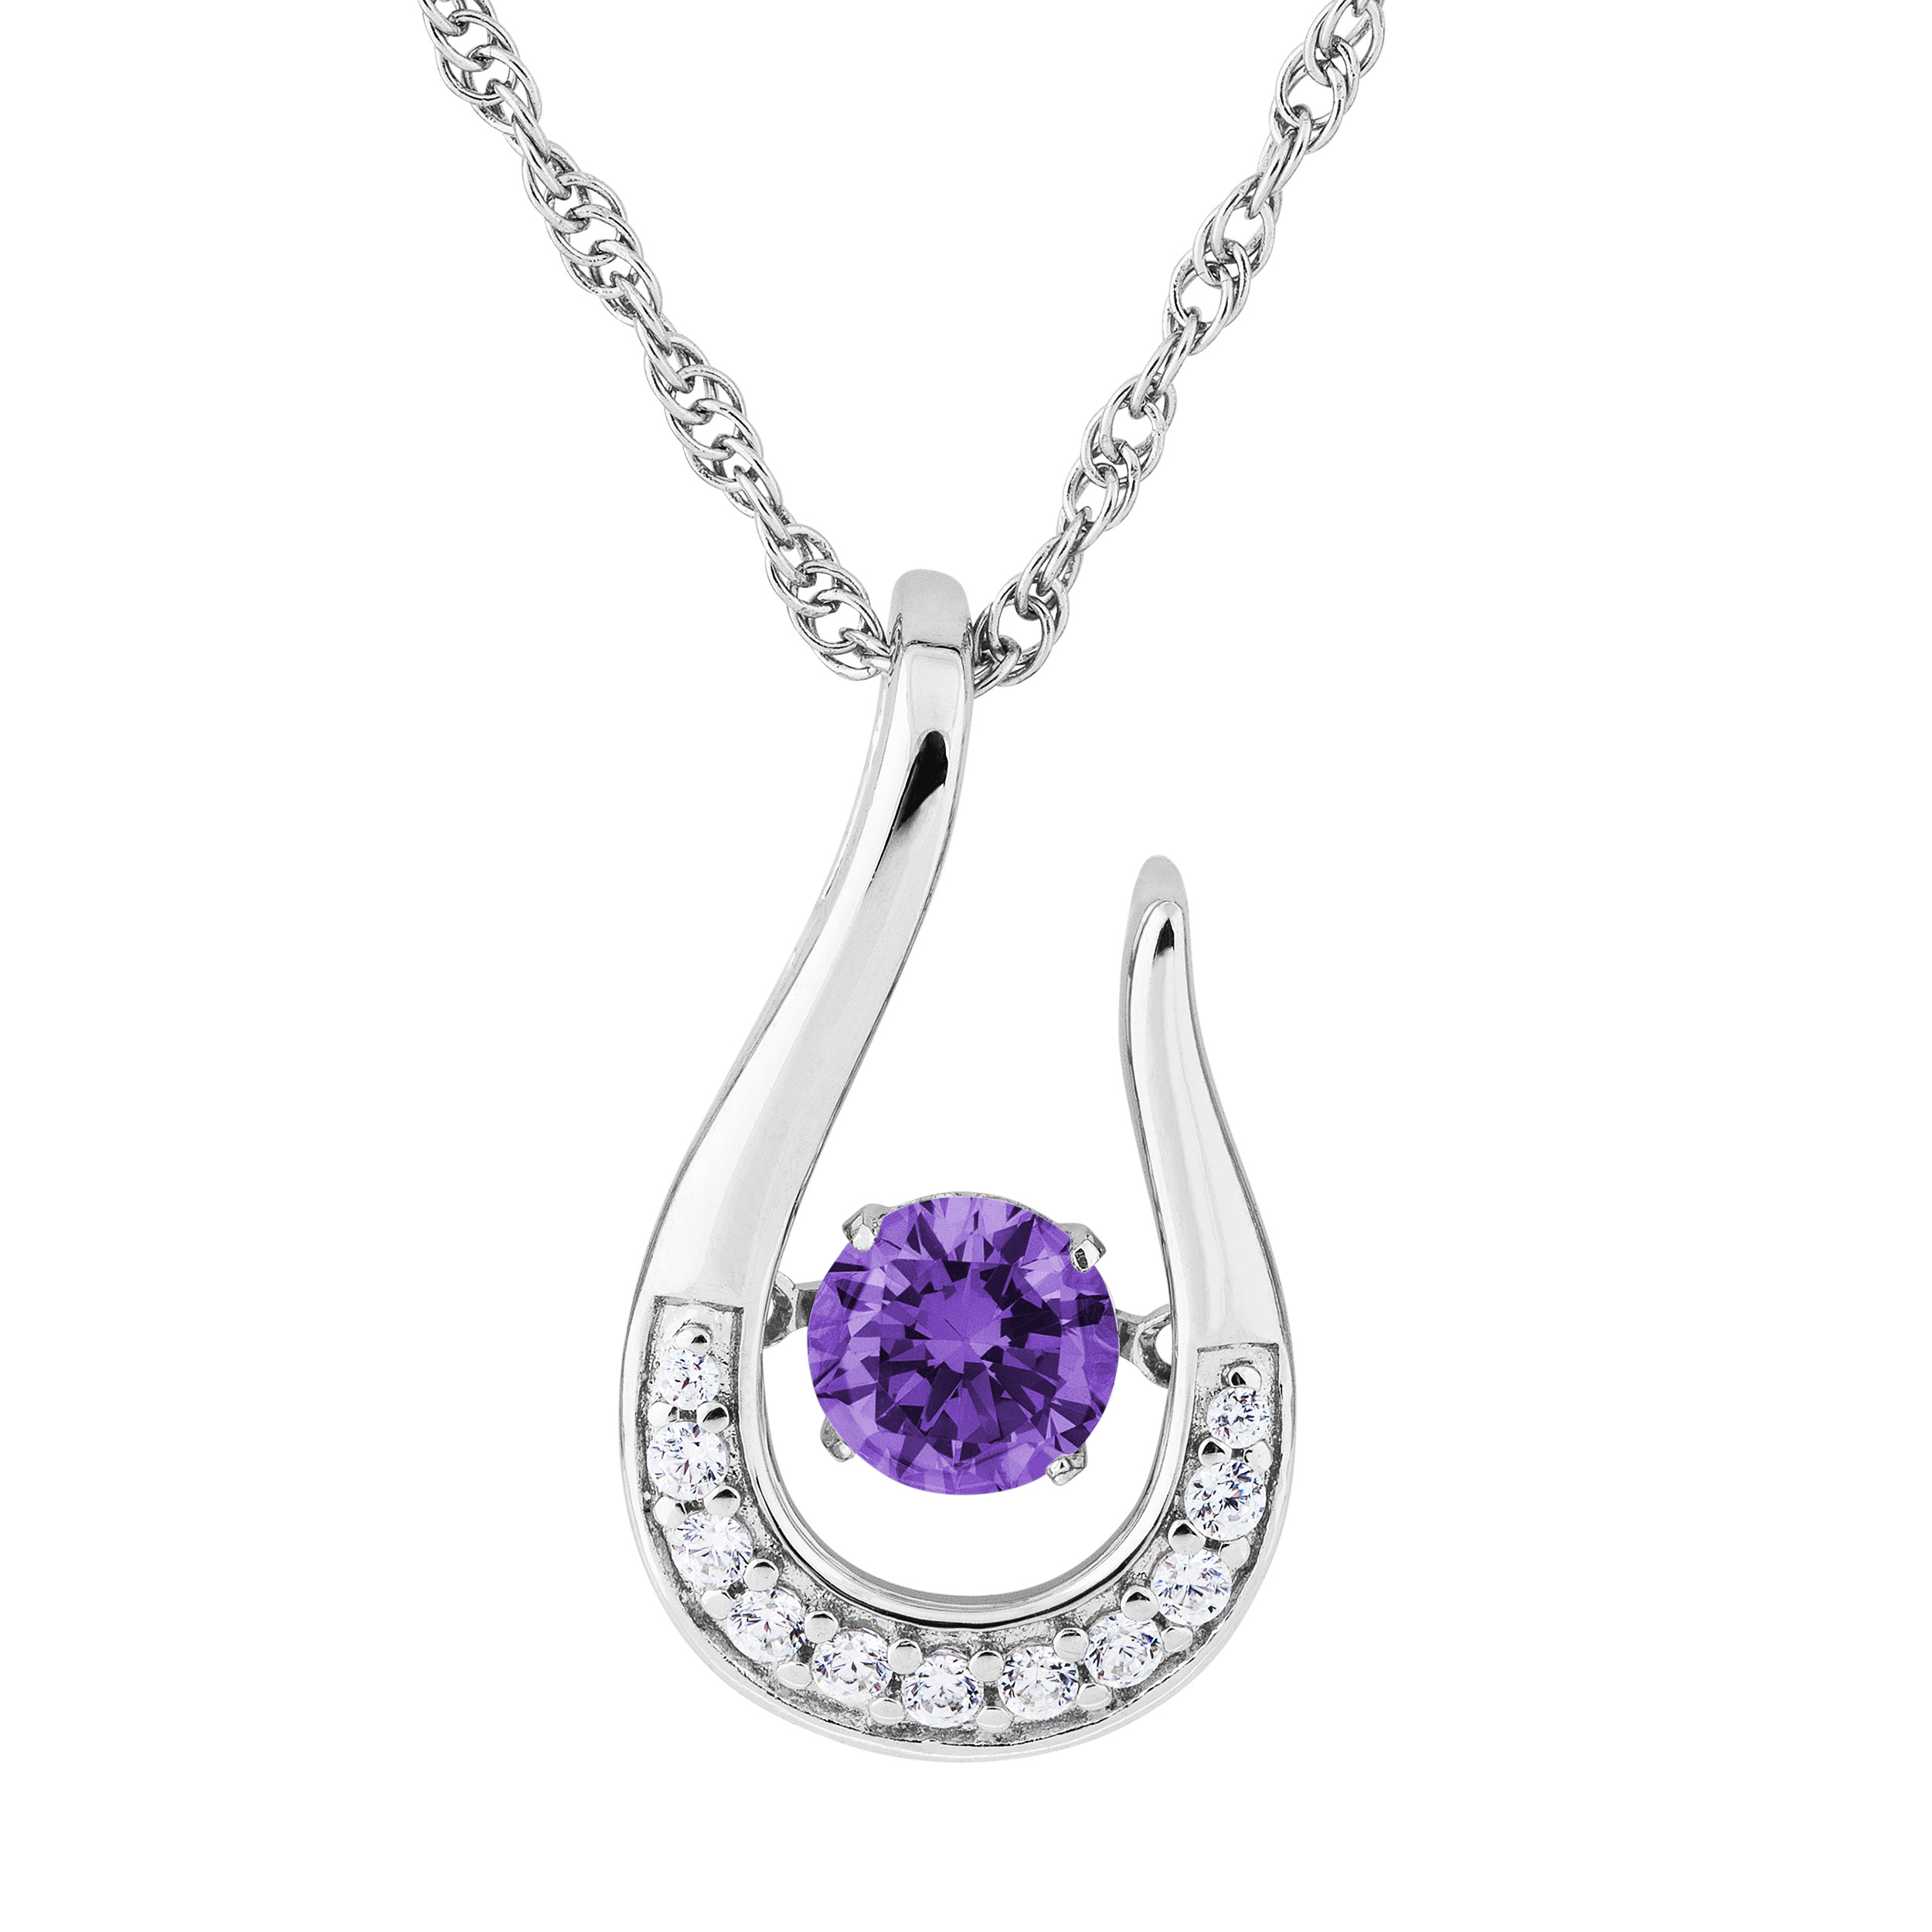 Alexandrite CZ with Cubic Zirconia June Teardrop Pendant Necklace, Rhodium Plated Sterling Silver, 18